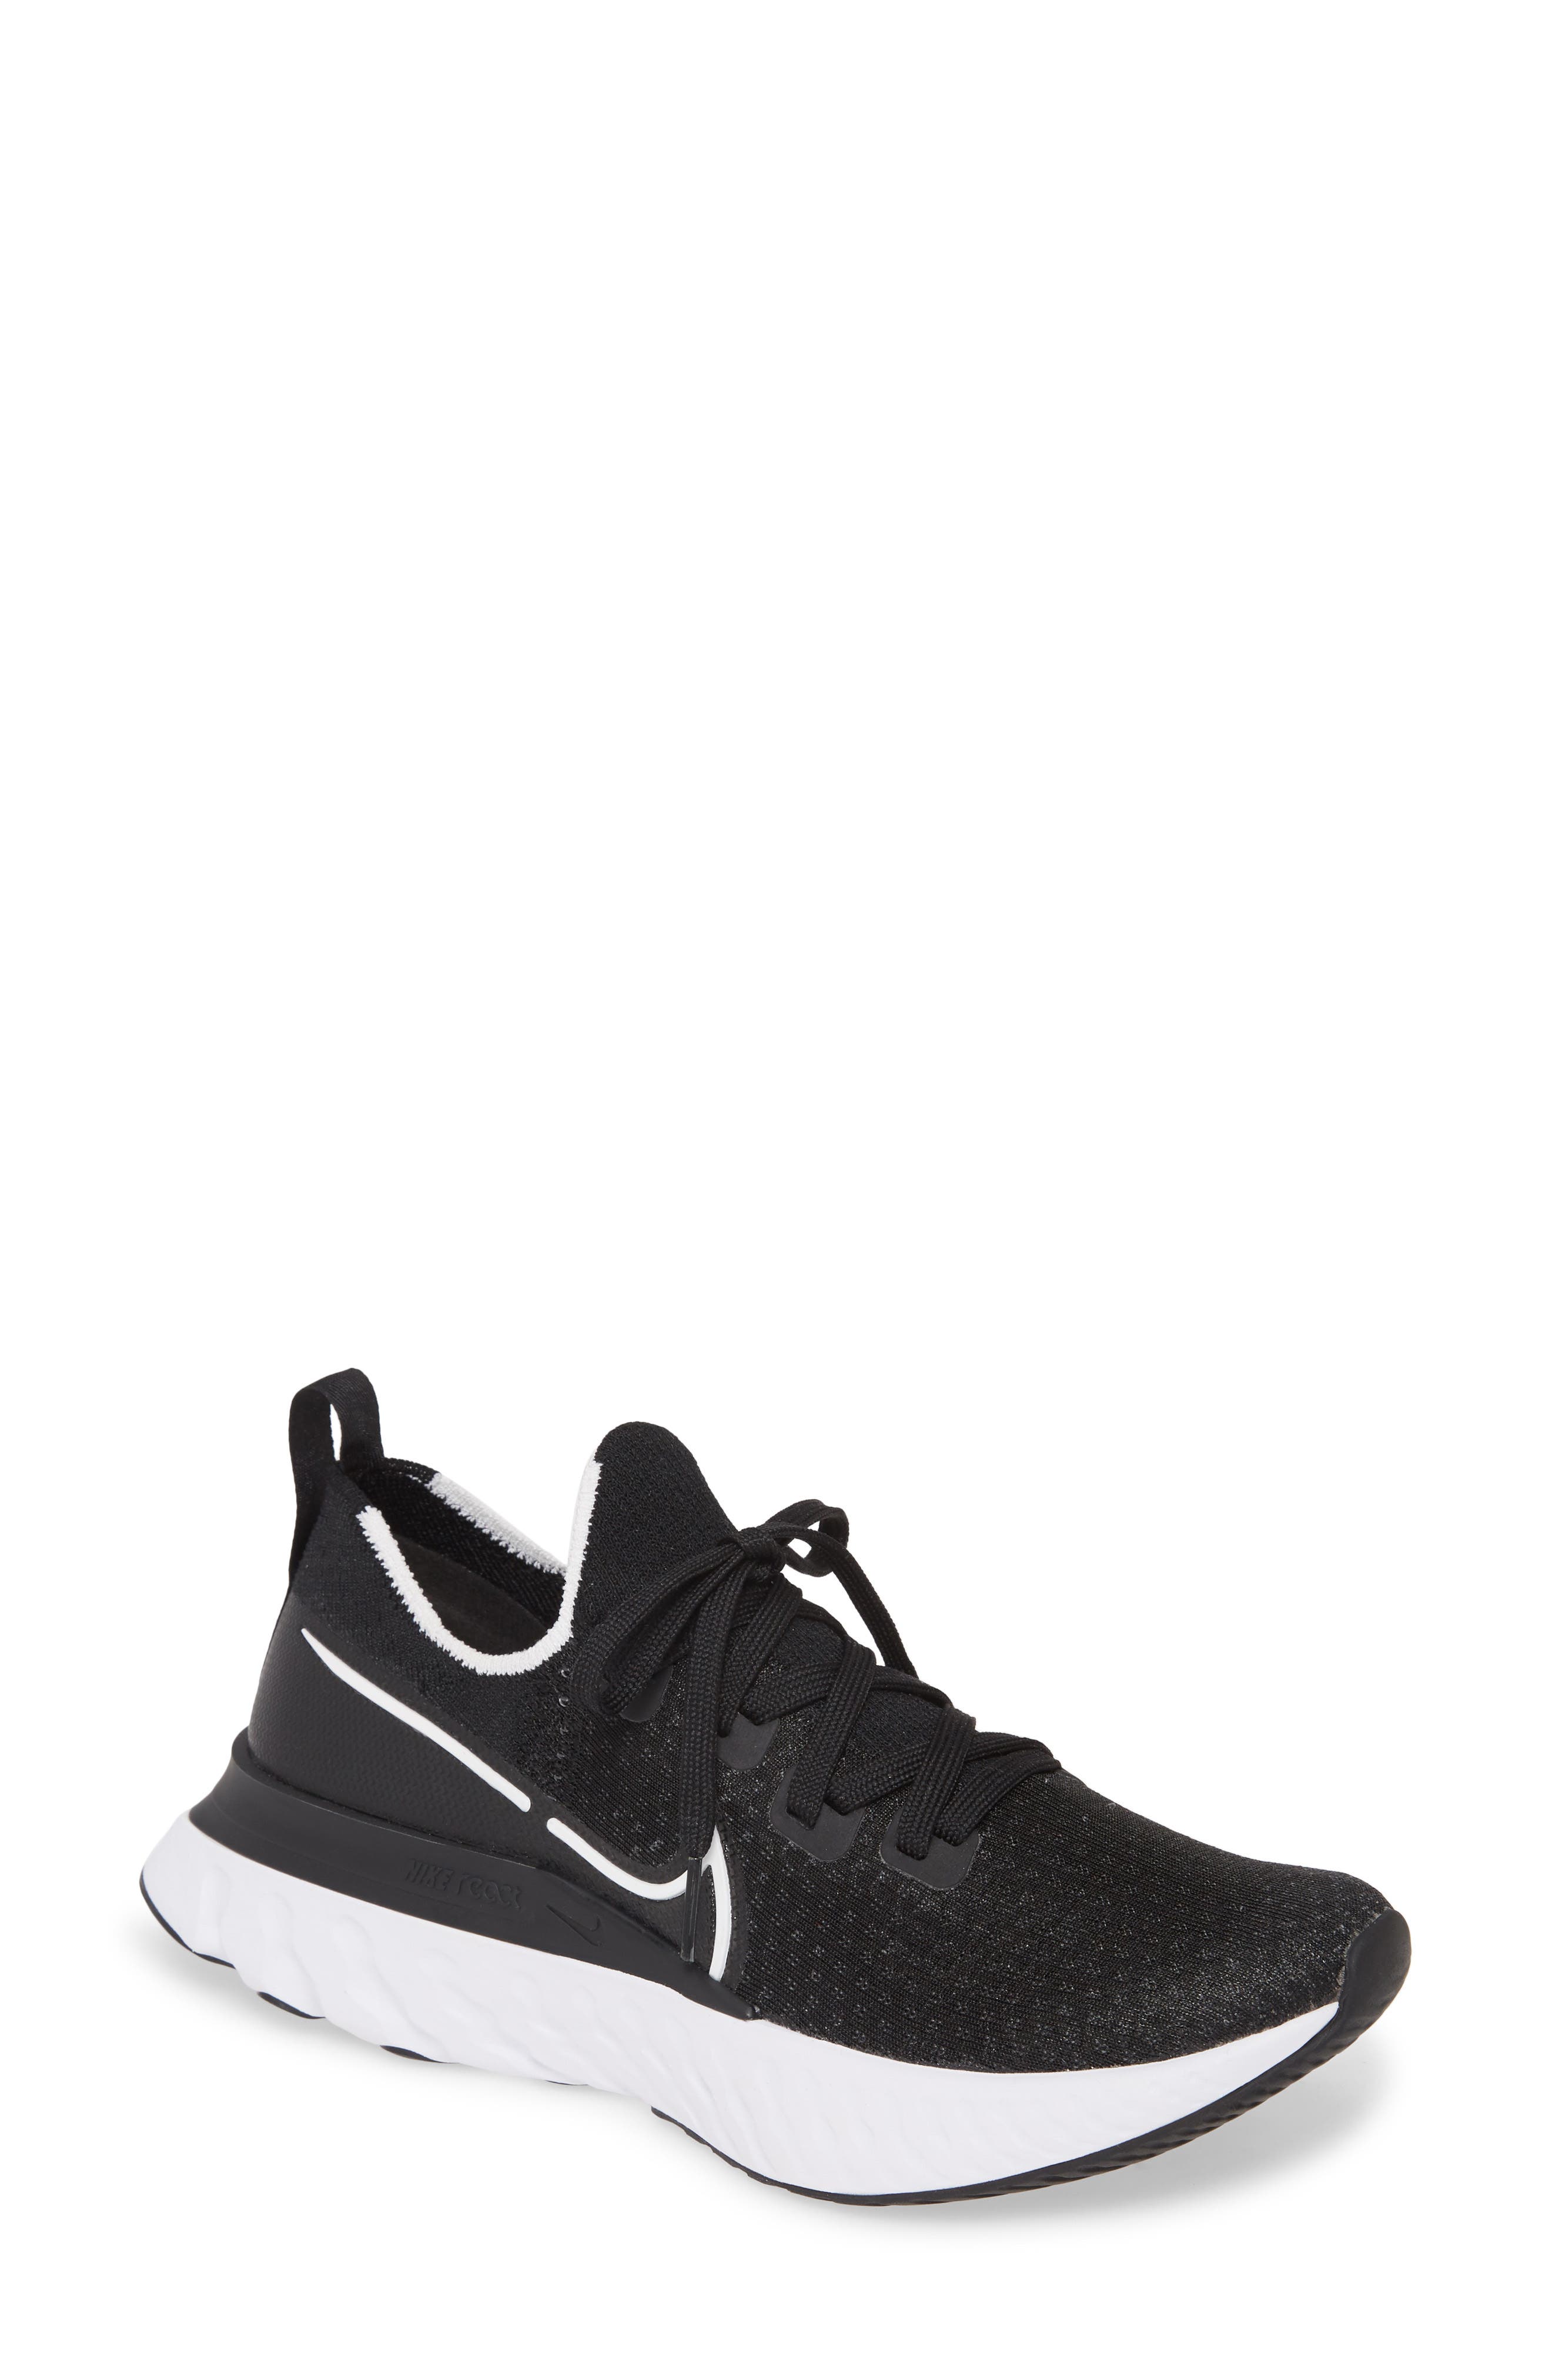 nordstrom nike womens running shoes